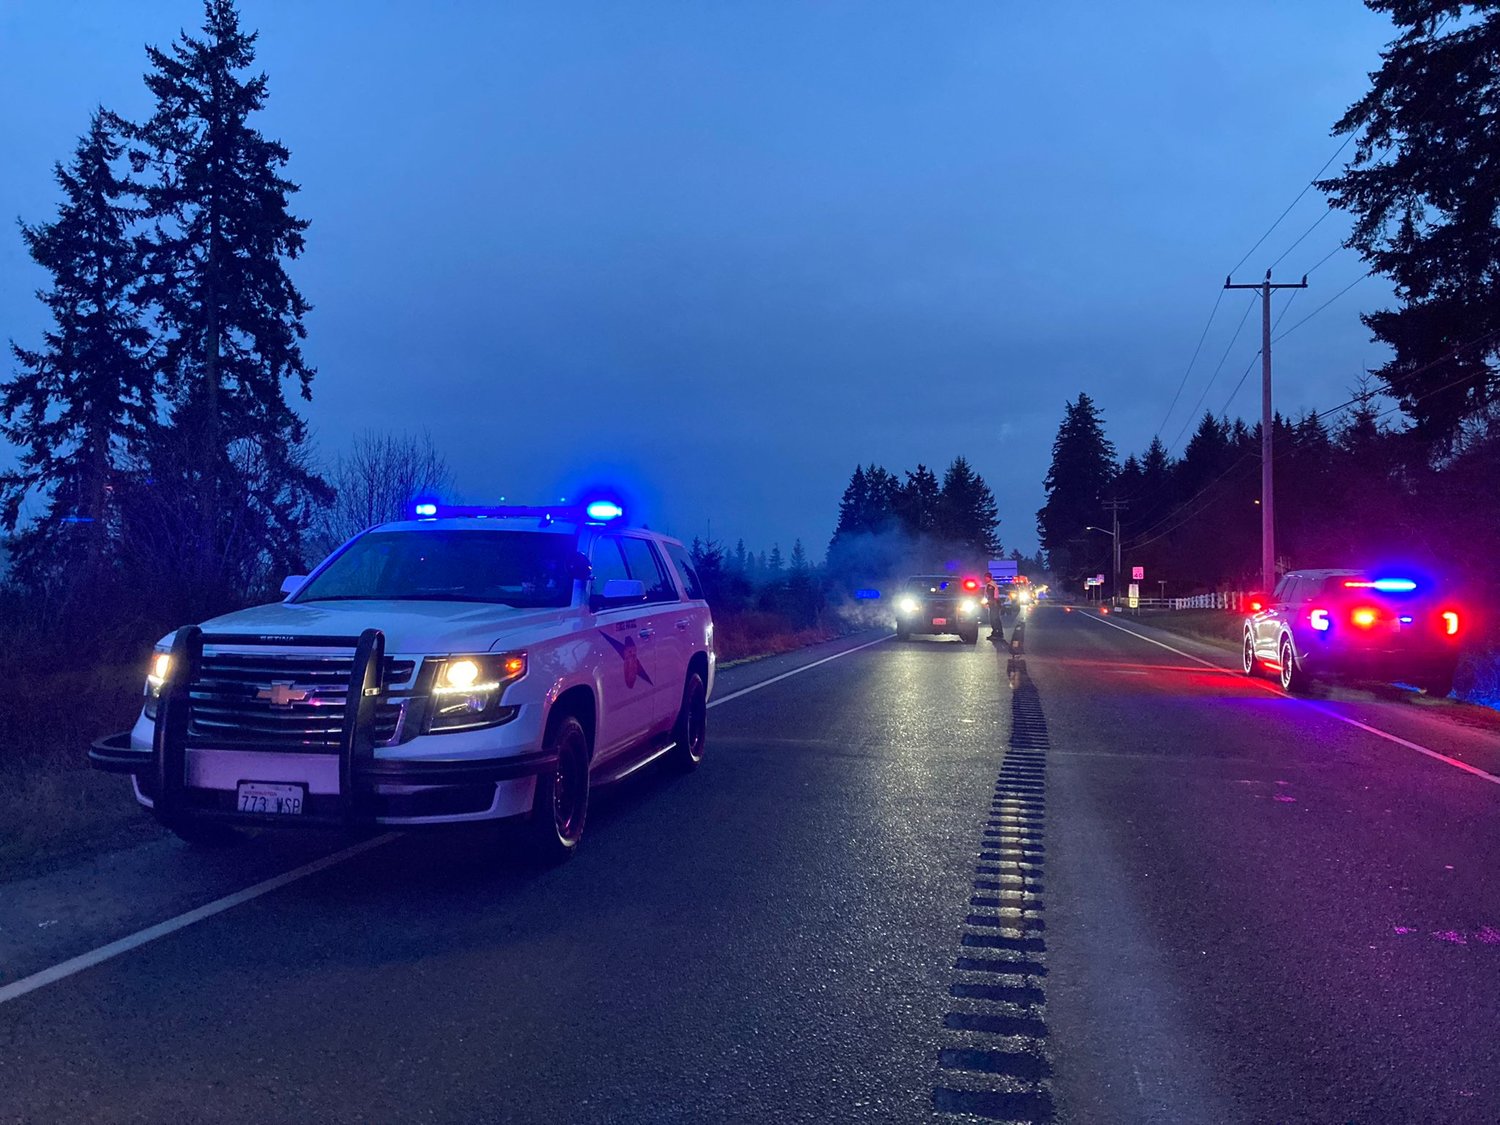 A woman from Yelm was killed at the scene of a fatal traffic collision on state Route 507 in Roy on Feb. 1. 